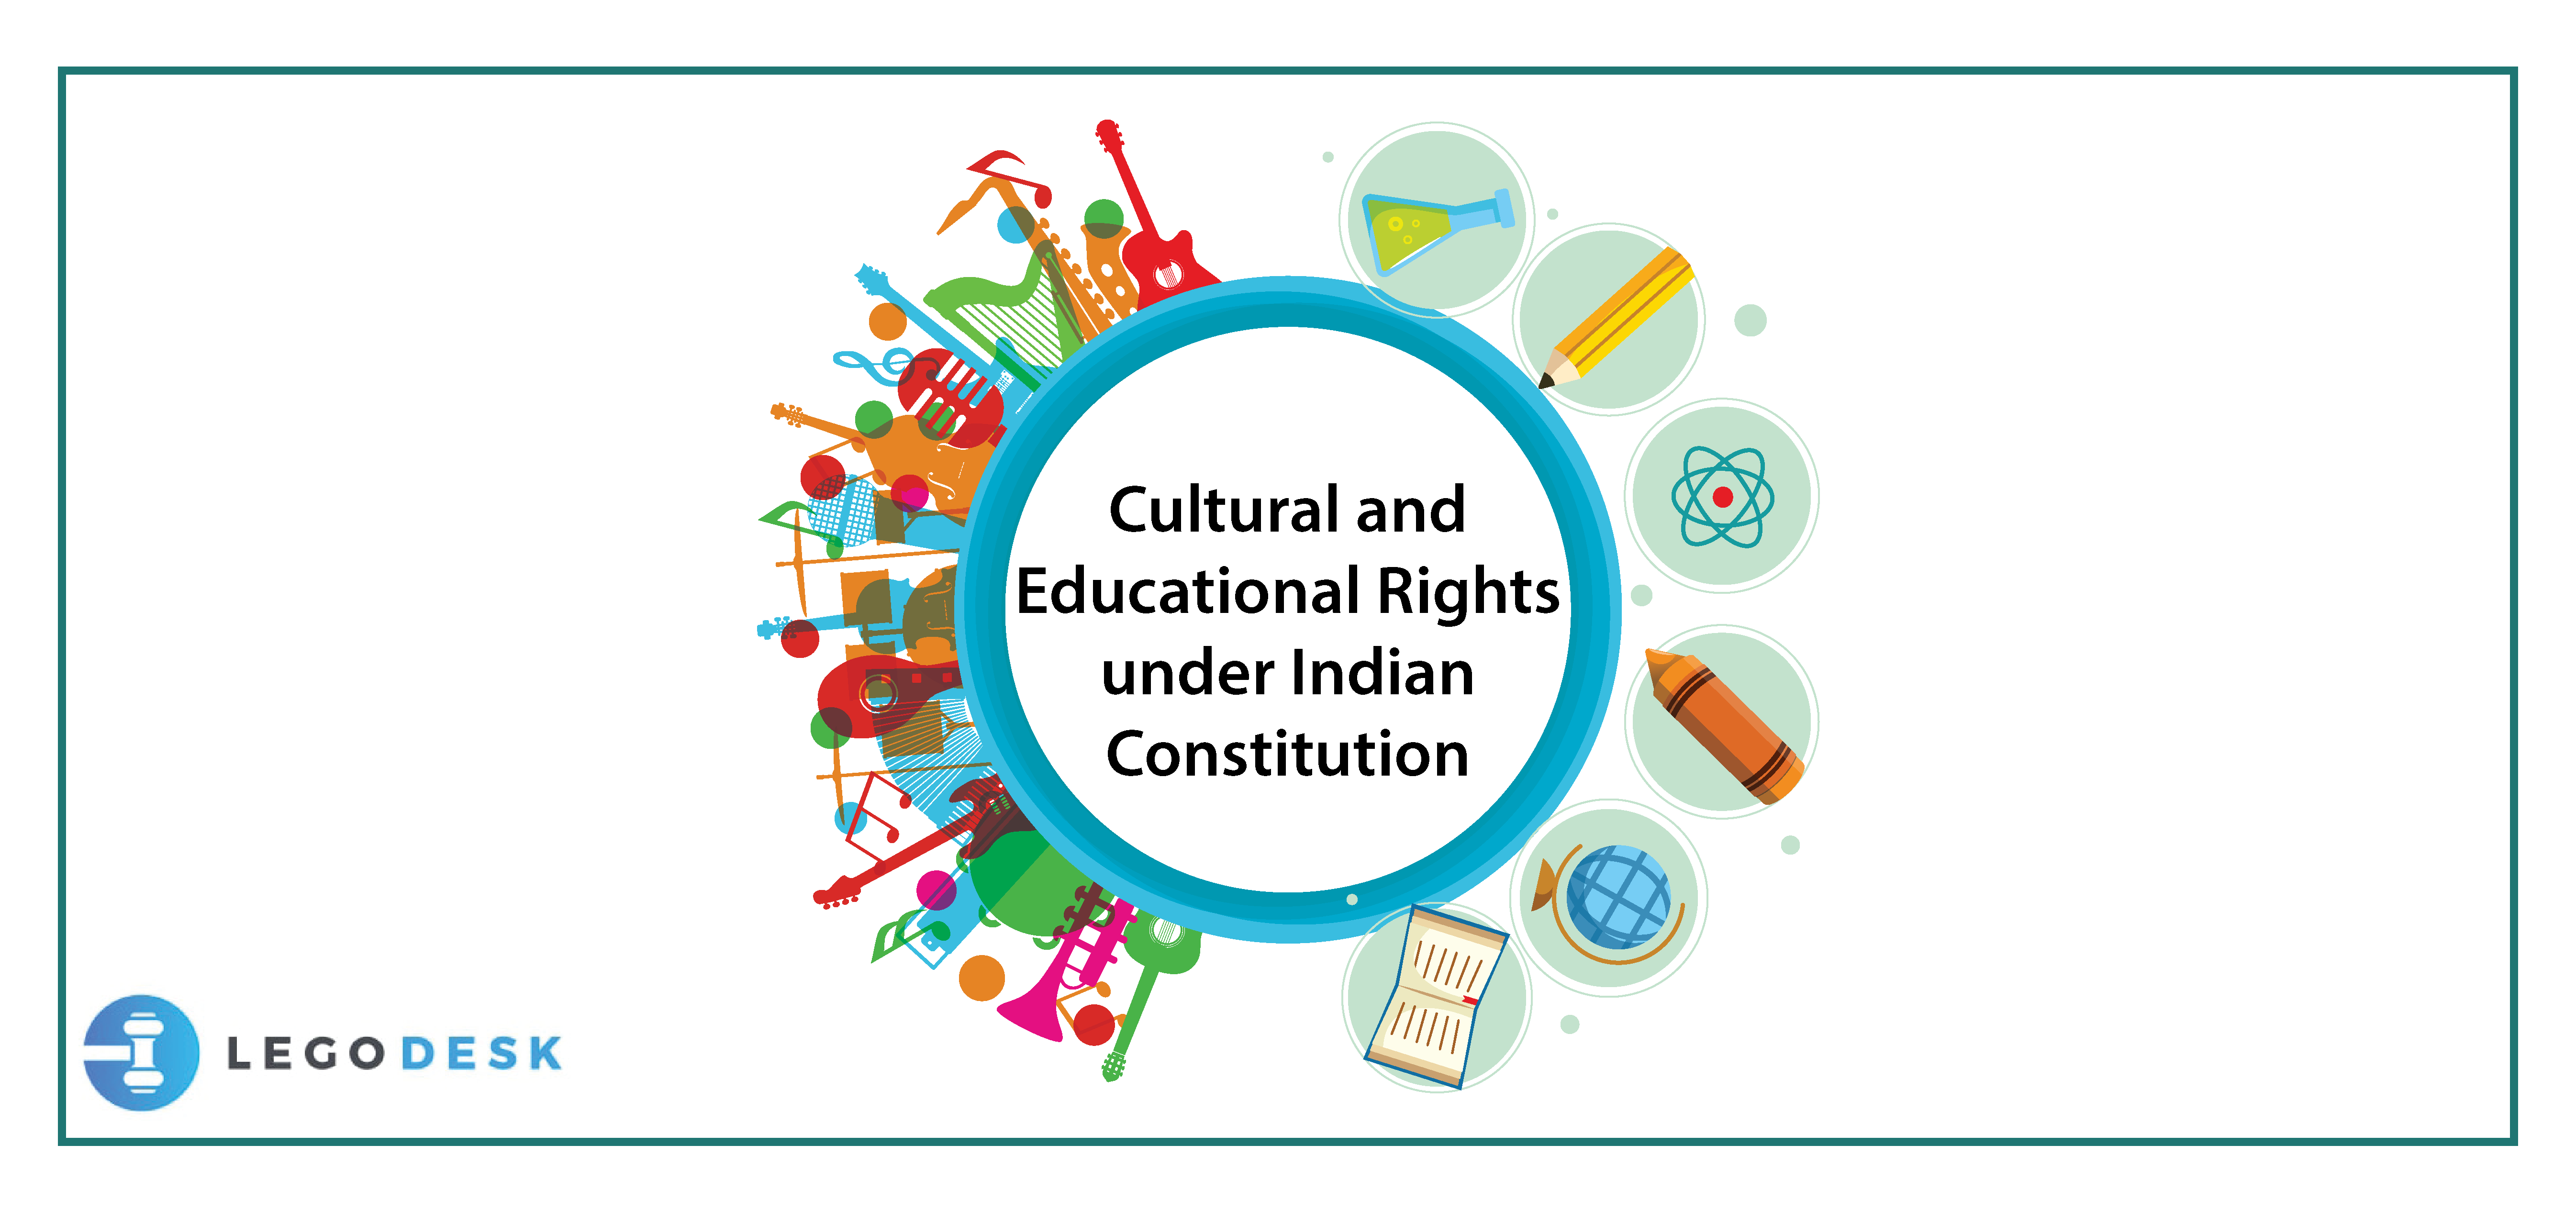 Cultural and Educational Rights under Indian Constitution